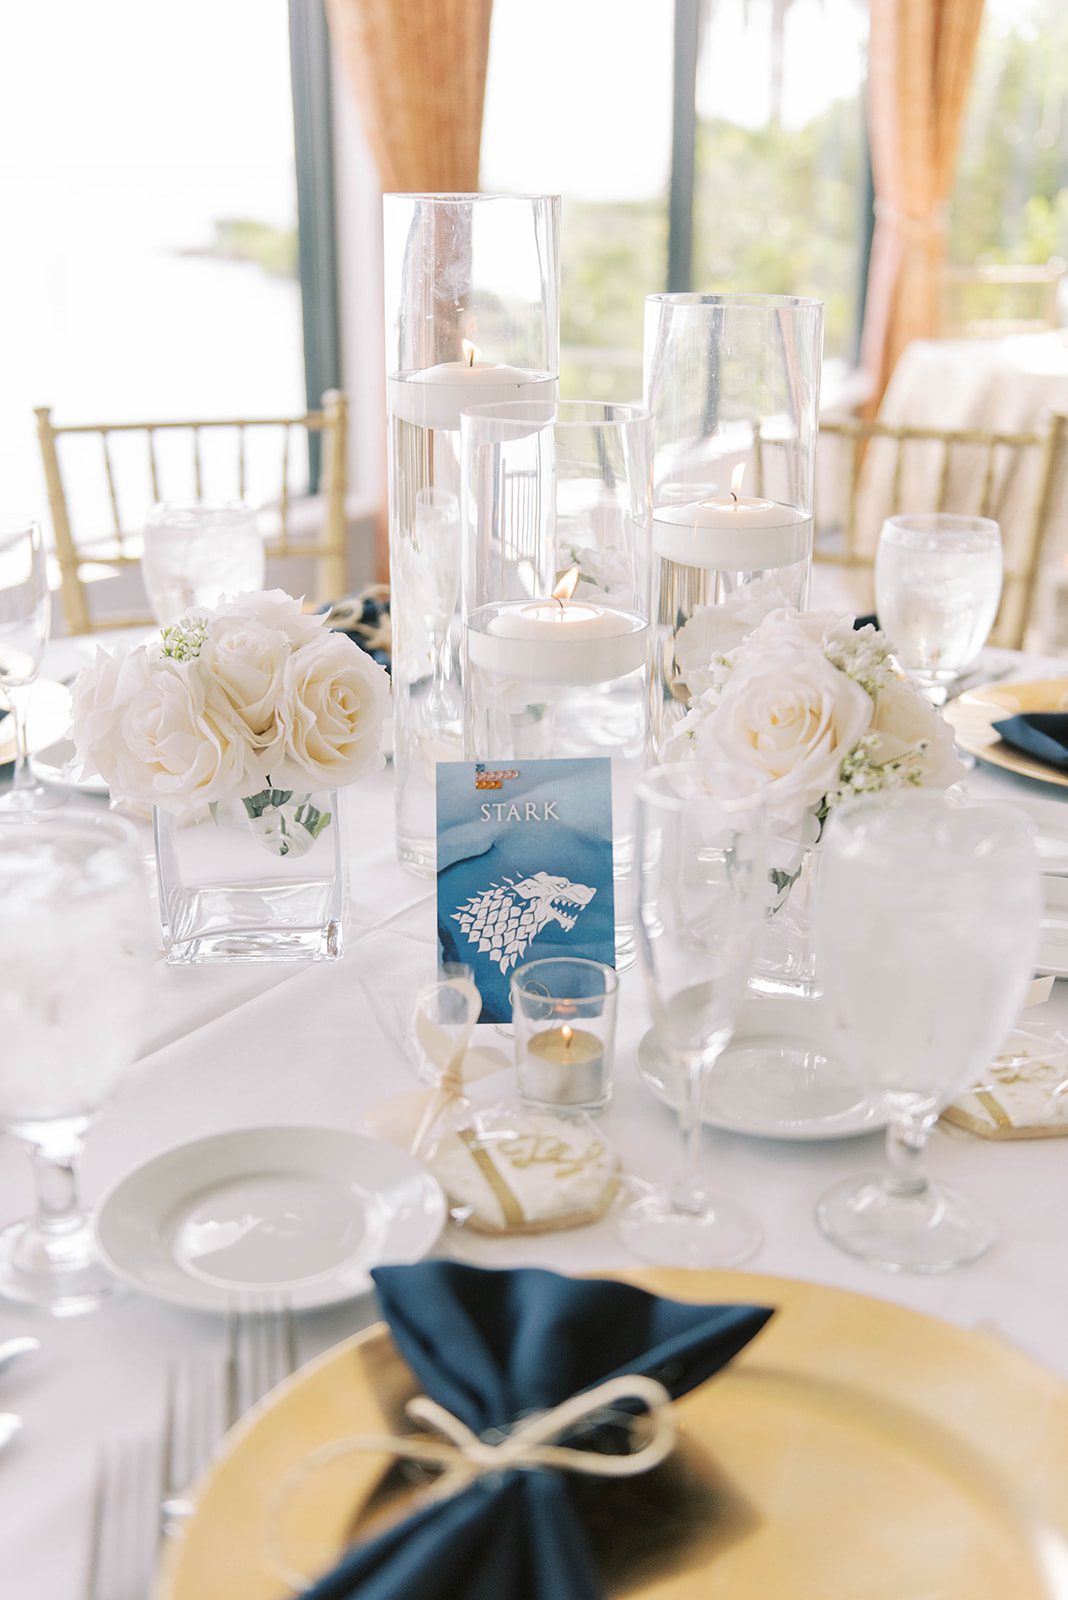 Game of Thrones themed wedding table settings with gold and blue details in Tampa Florida